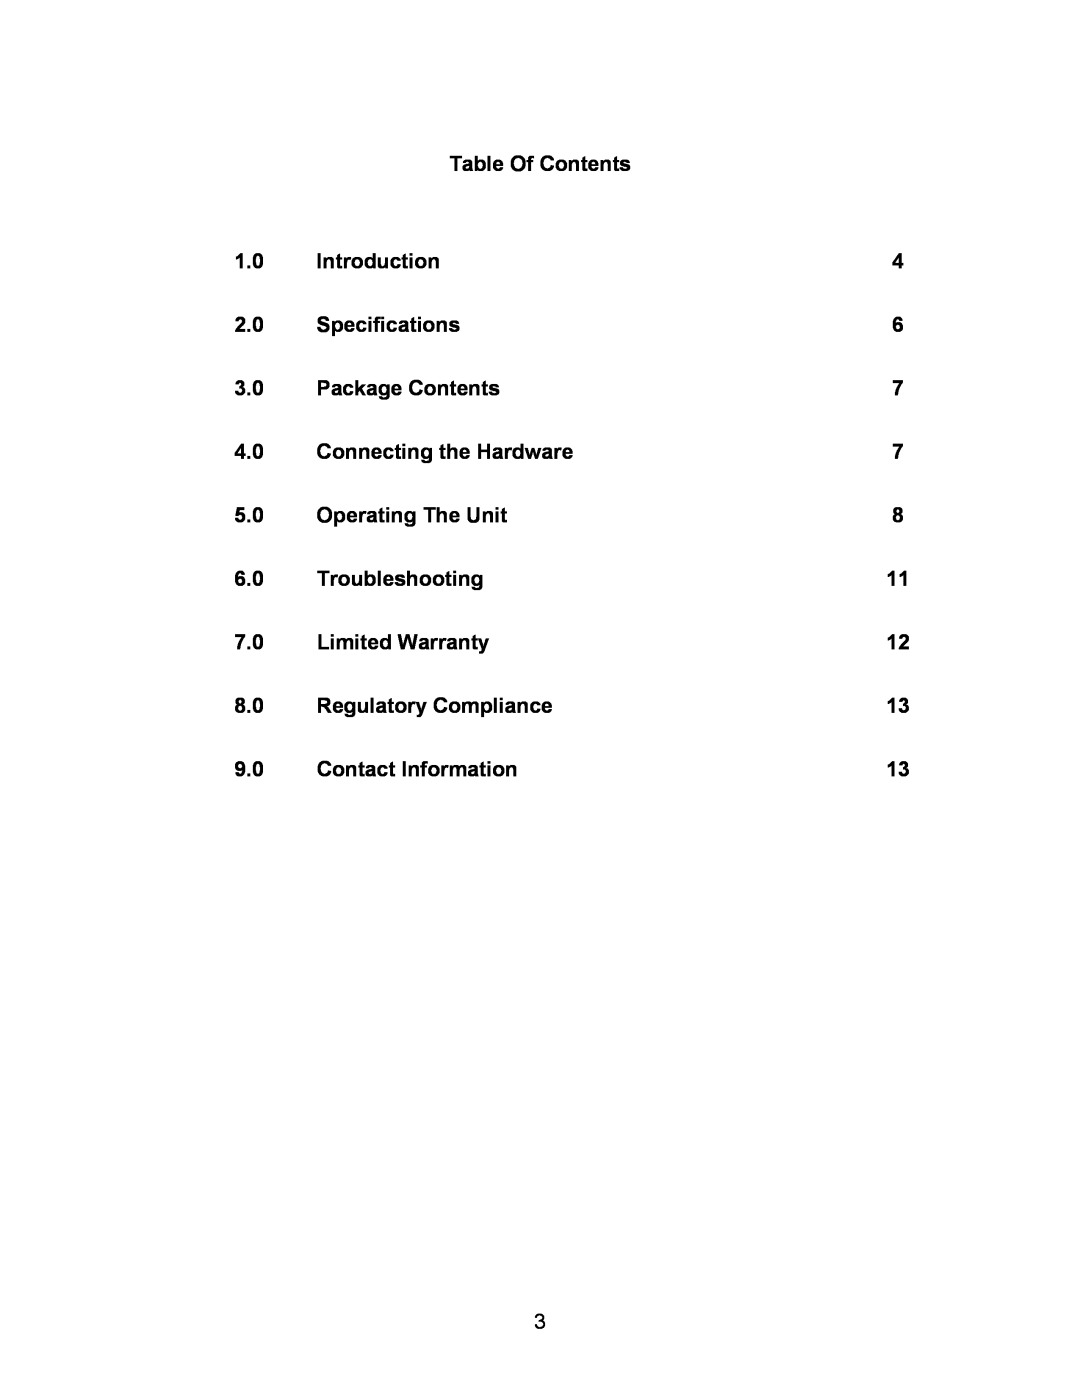 RCA AVT-2050 Table Of Contents, Introduction, Specifications, Package Contents, Connecting the Hardware, Troubleshooting 